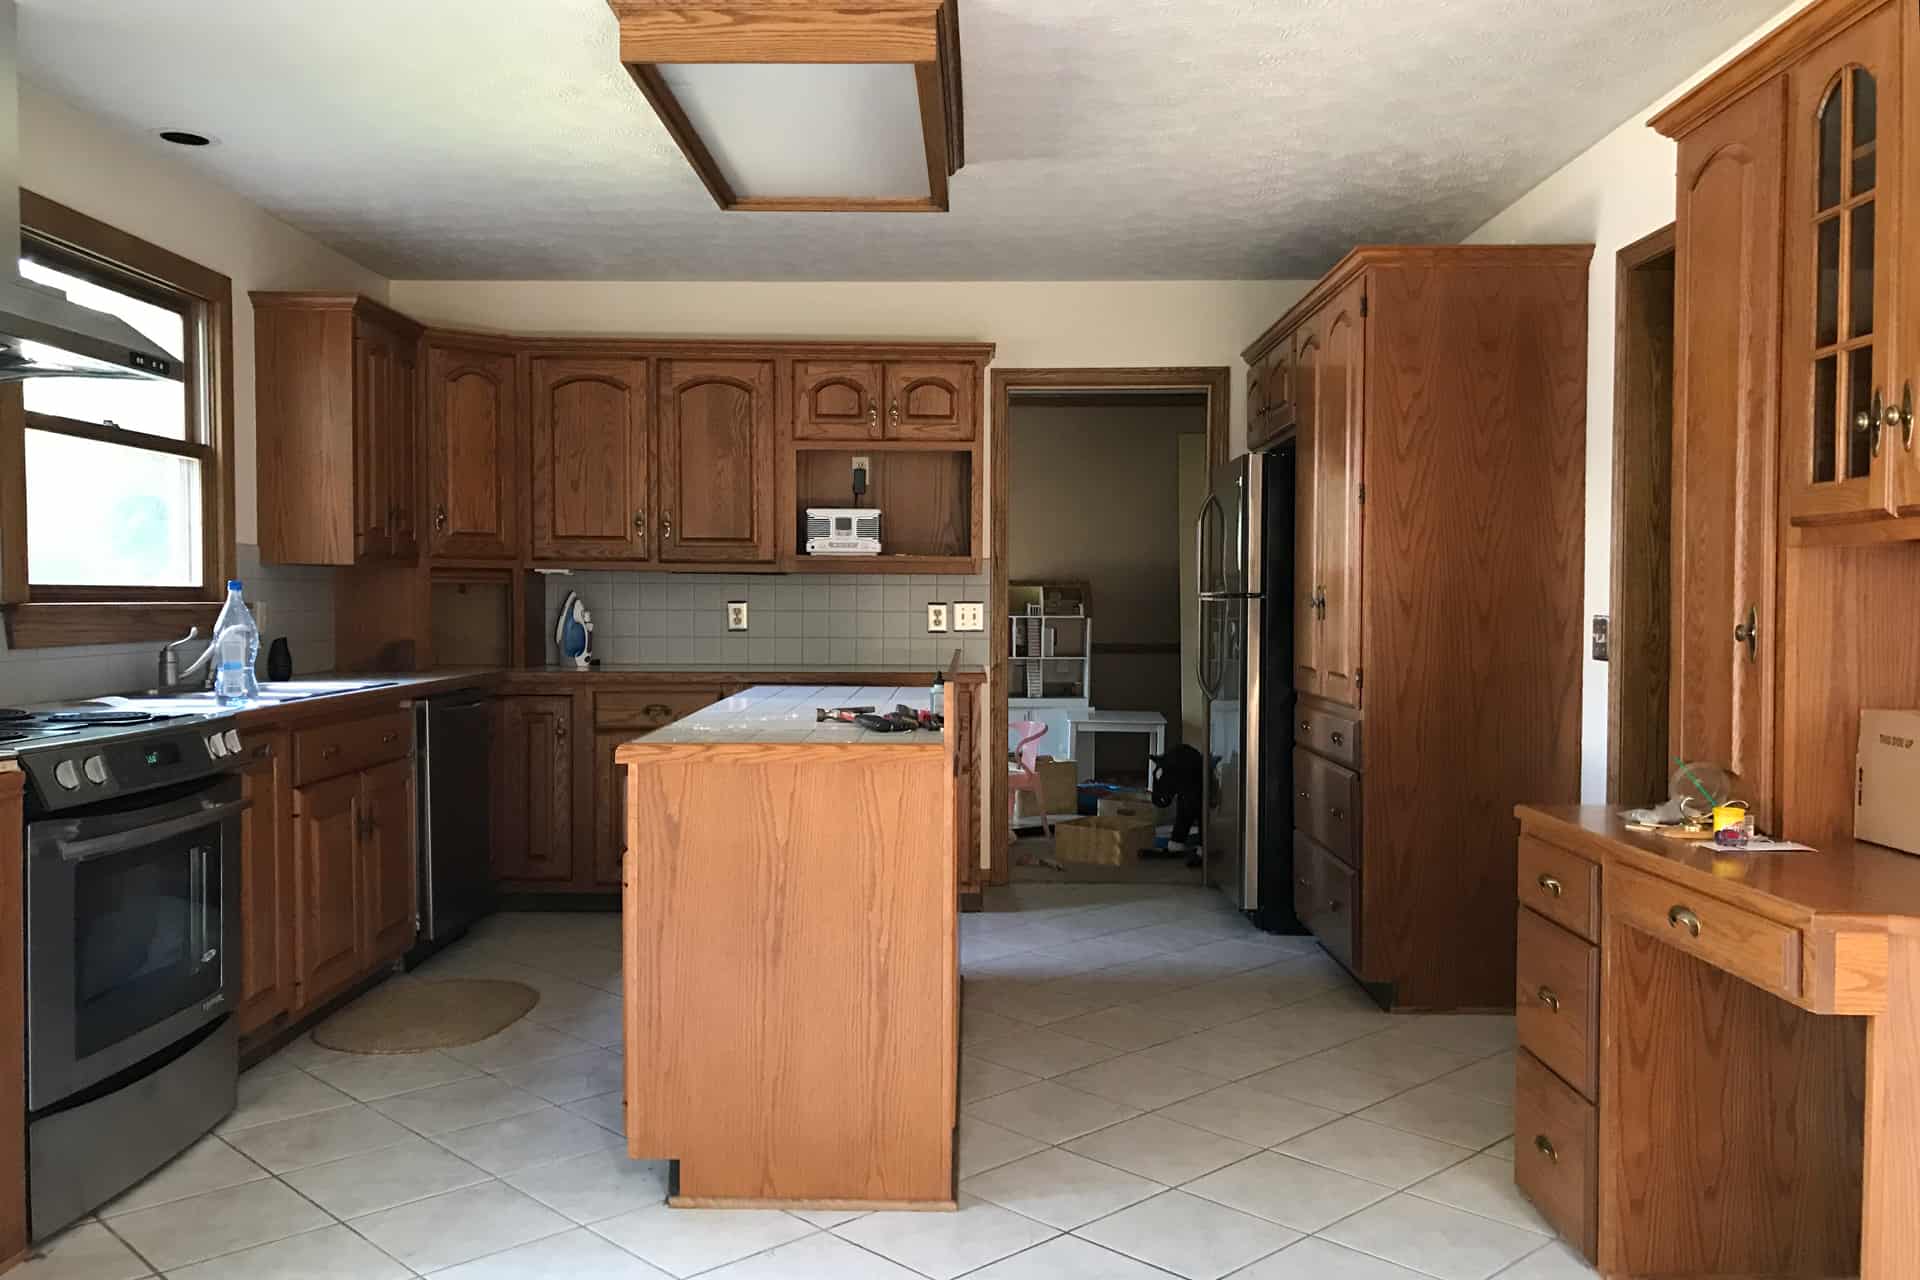 kitchen with brown cabinets, an island, and tile floor